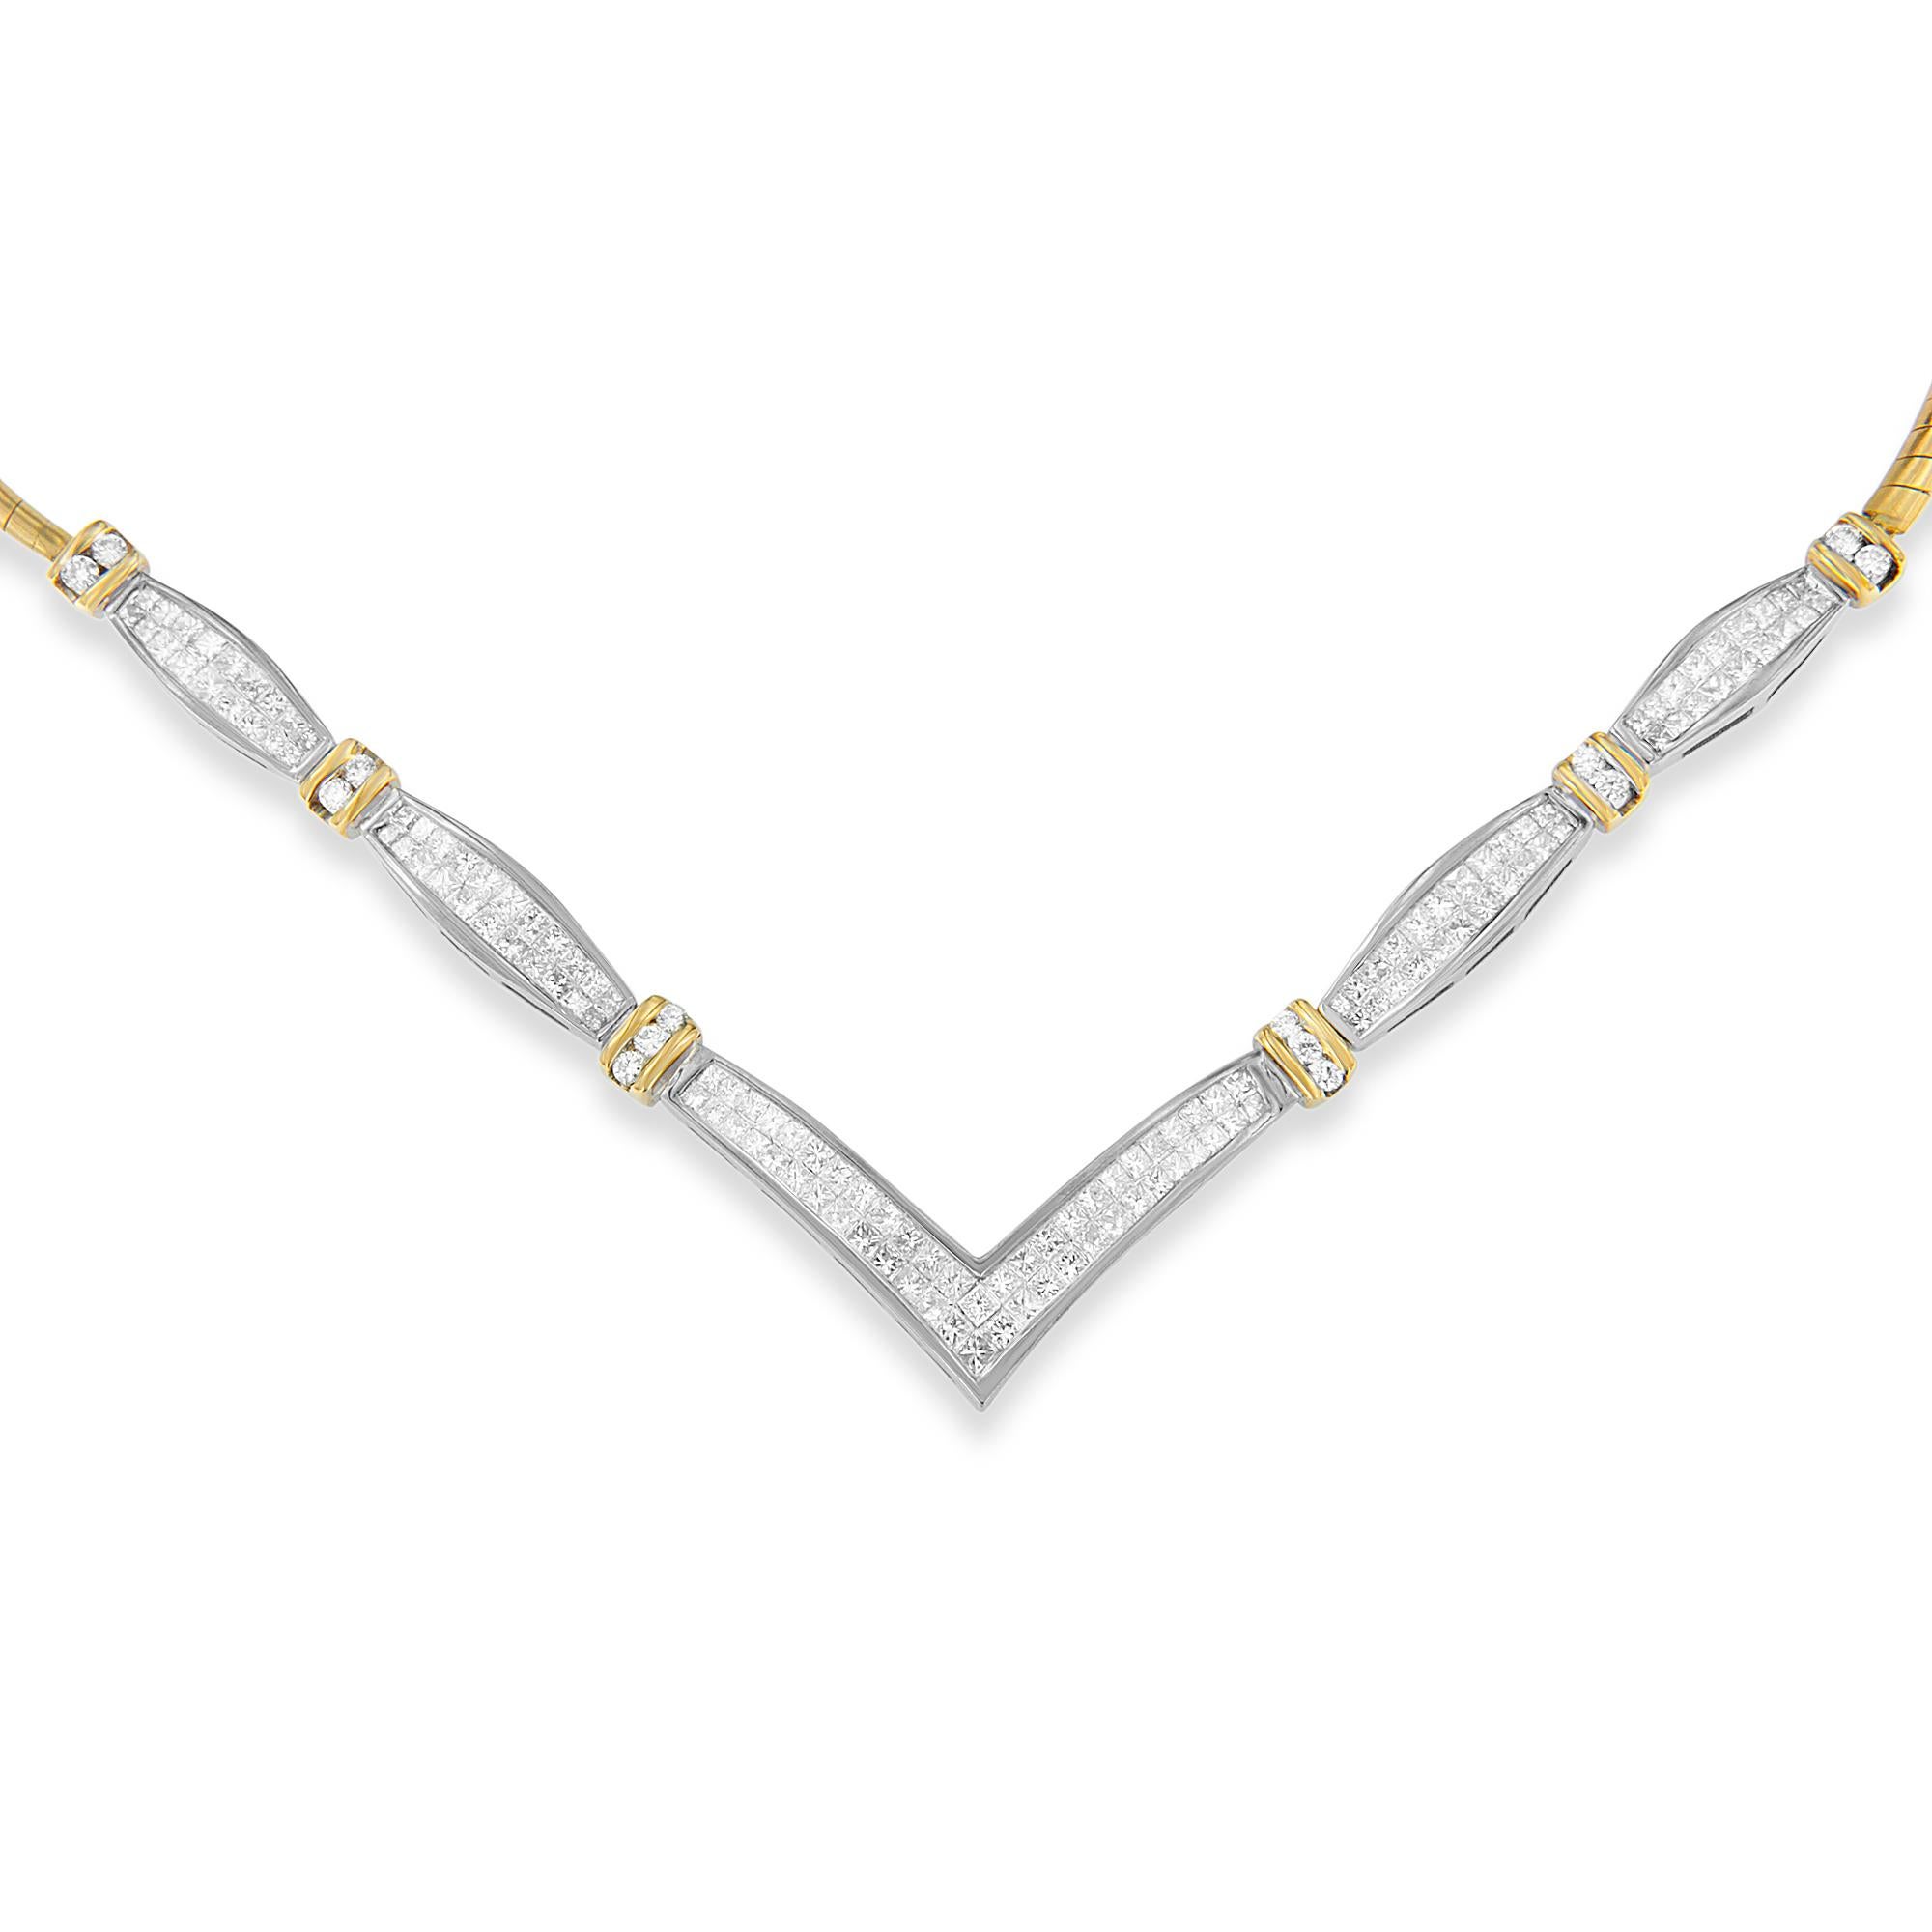 Surprise her by presenting this beautiful and eye-catching 3 carat neck piece. It is crafted from alluring weaves of 14kt white and yellow gold. Formed in an elegant V shape, the necklace is set with alternating segments of princess cut diamonds and